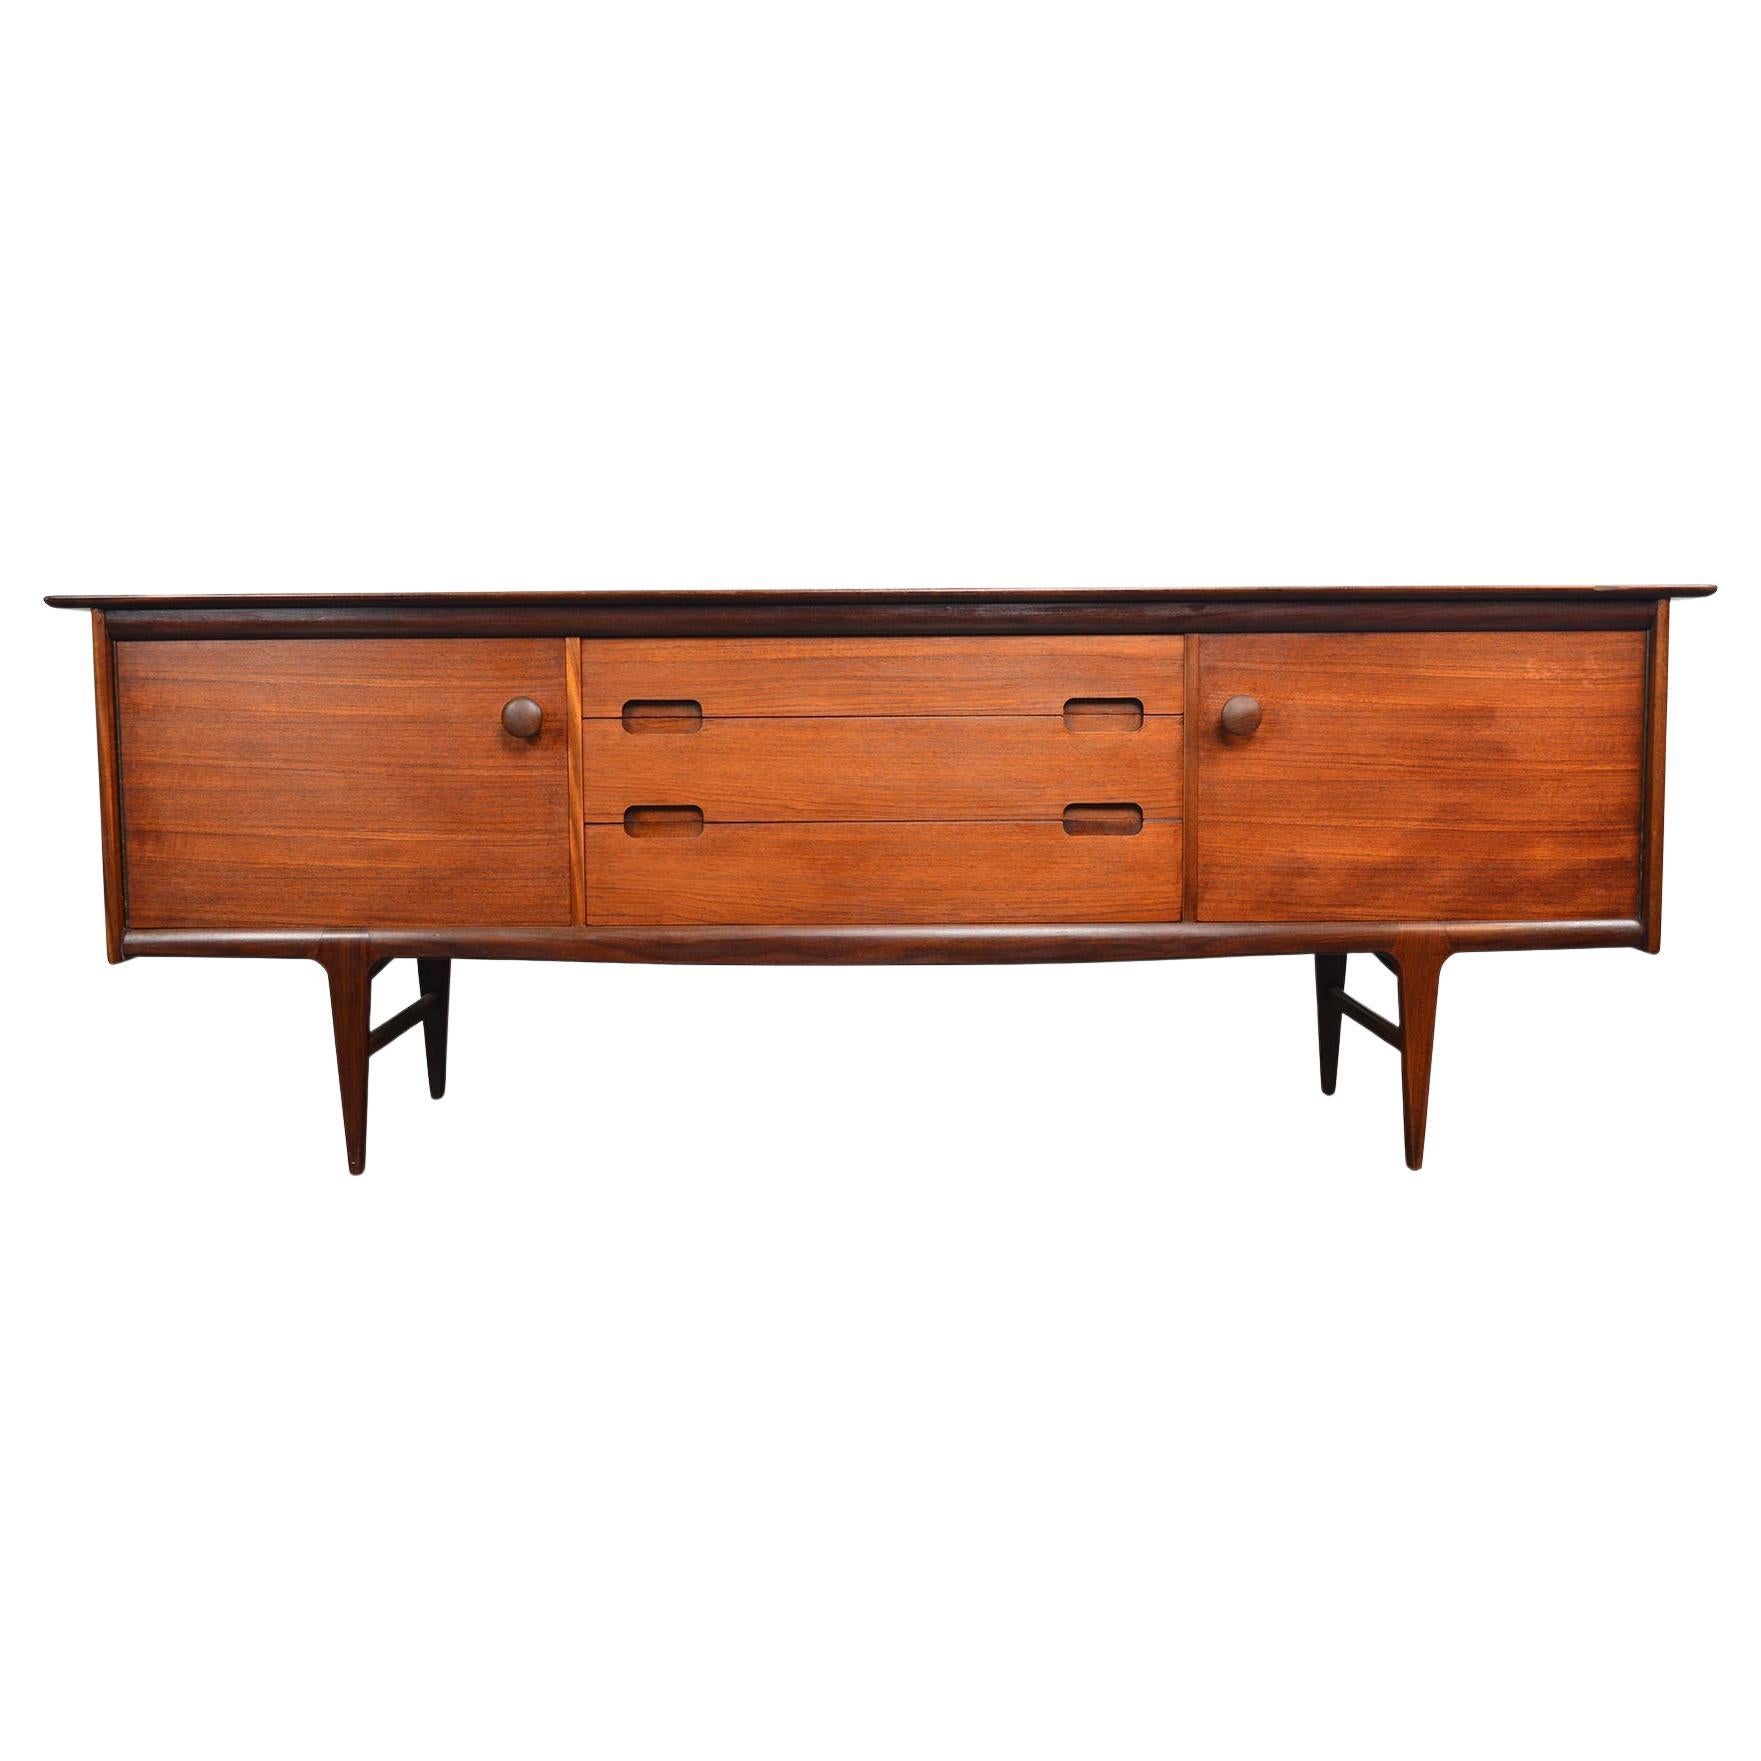 Large Teak Credenza by a. Younger Ltd #2